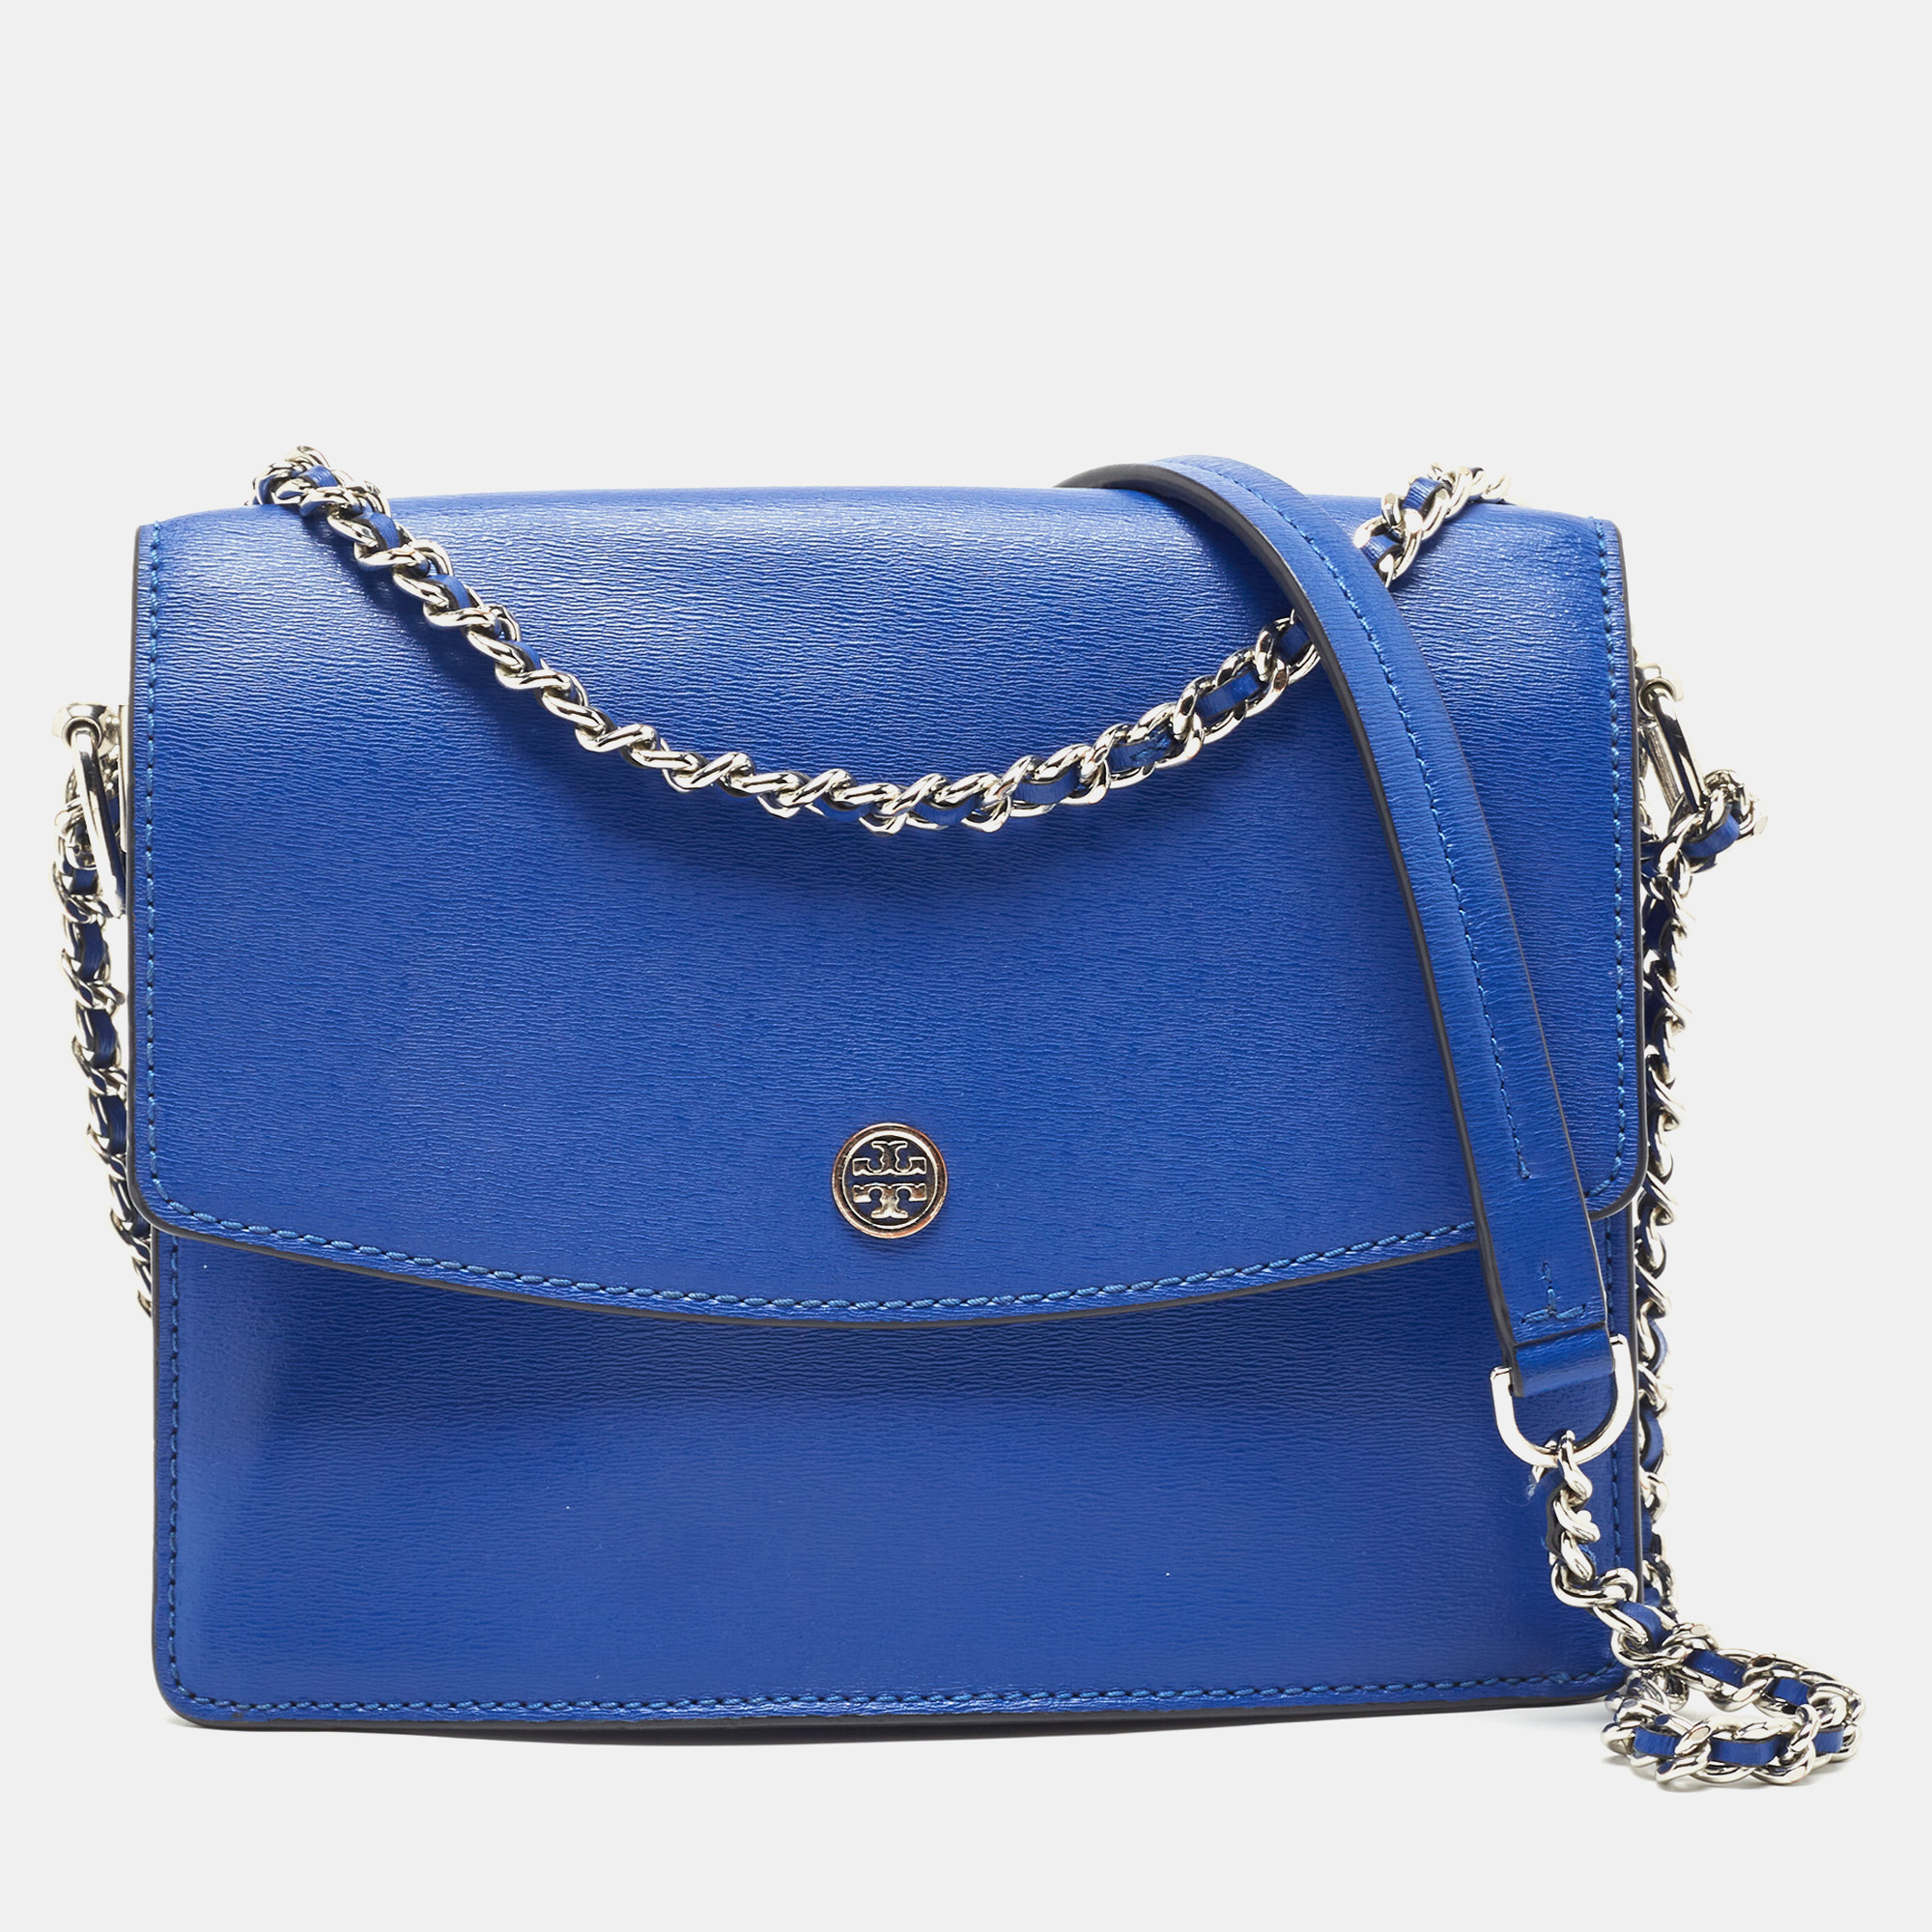 Tory Burch Blue Leather Robinson Convertible Shoulder Bag